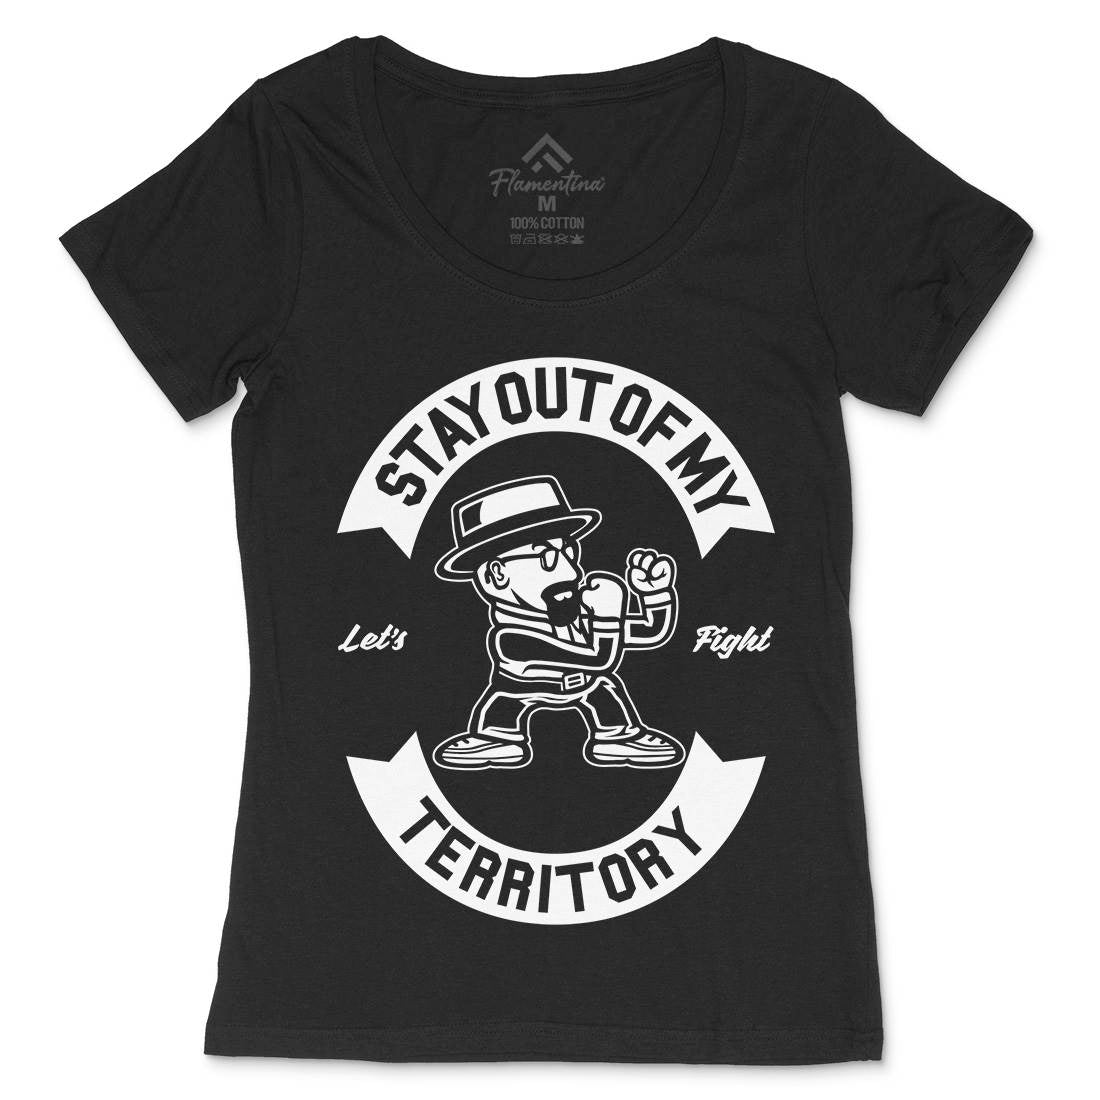 Stay Out Womens Scoop Neck T-Shirt Retro A284